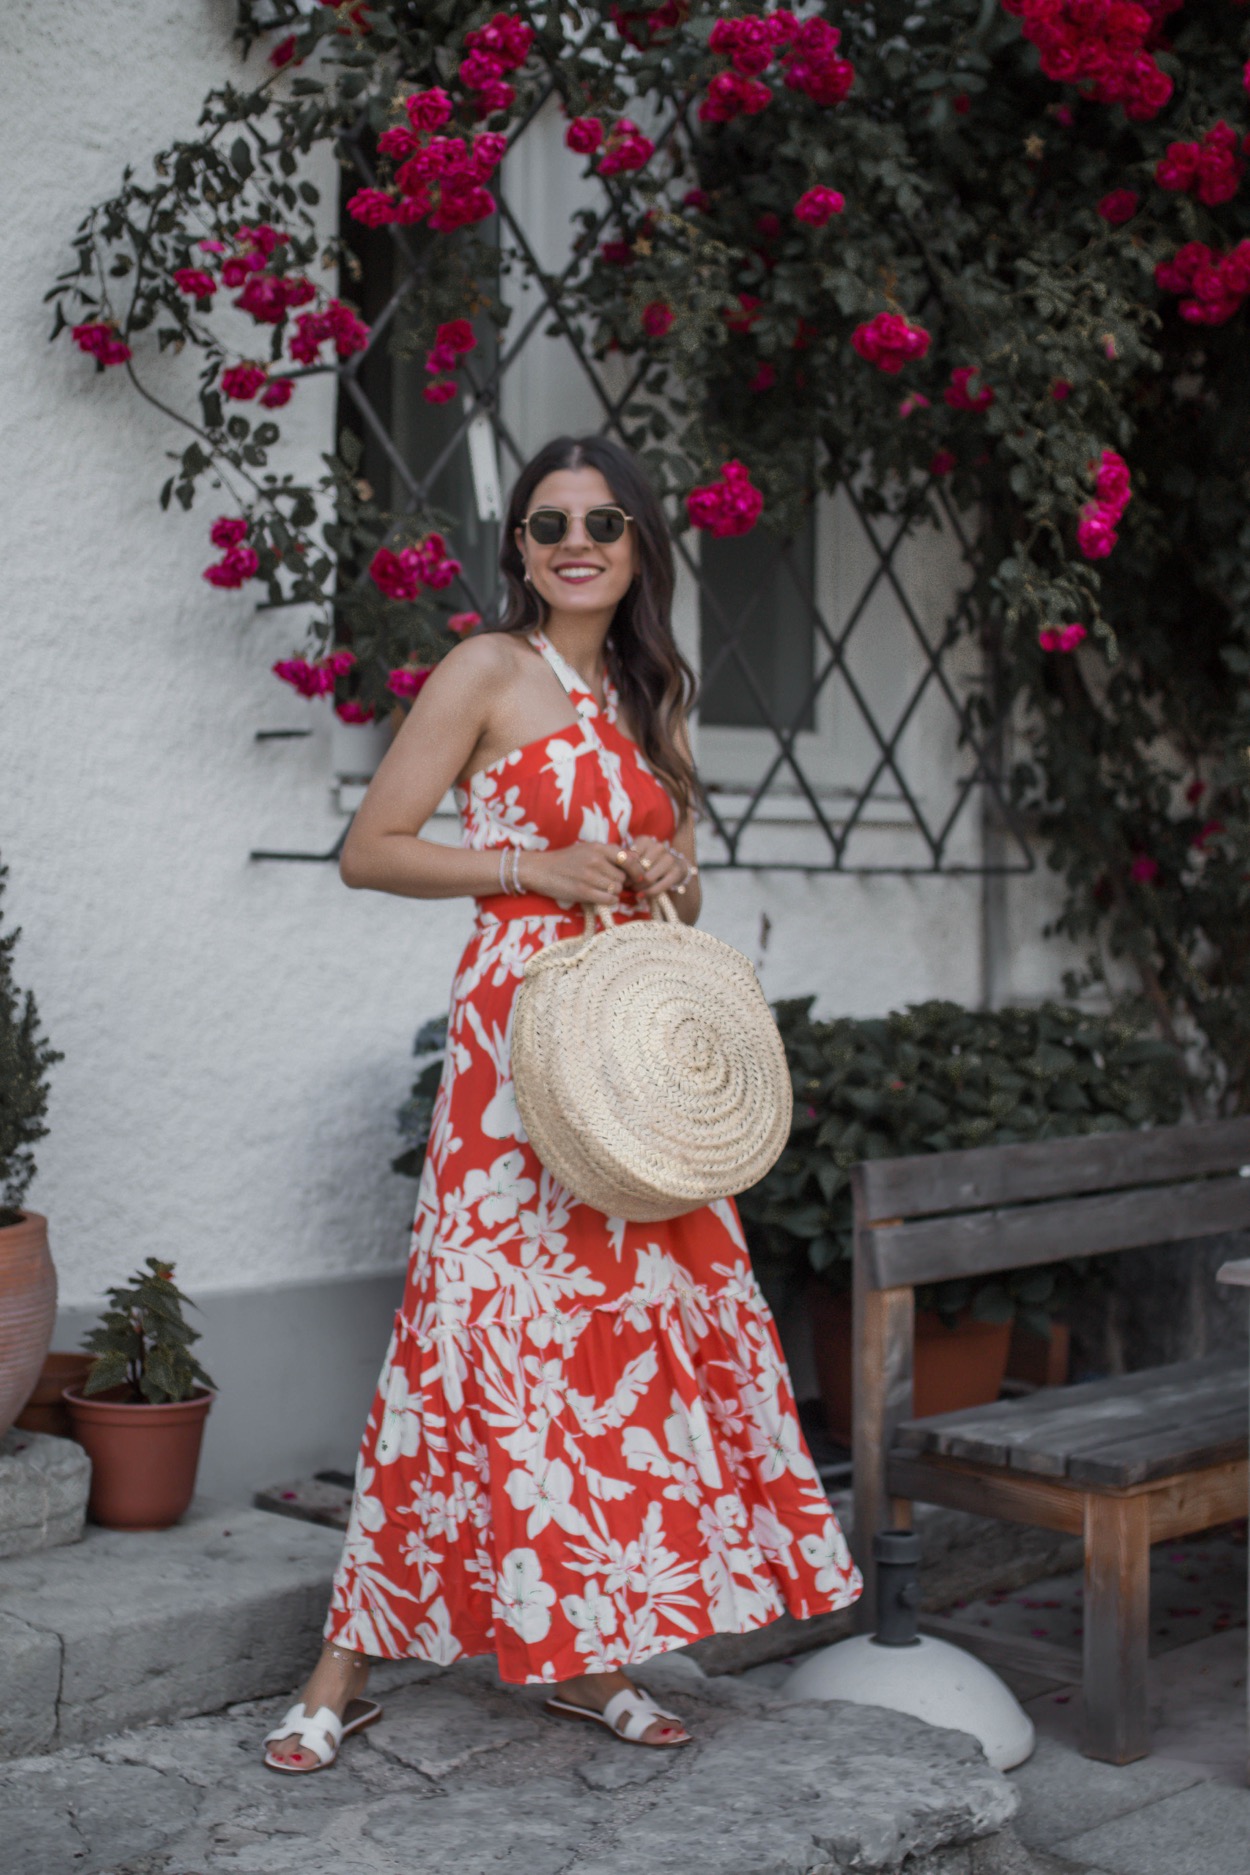 BLOG YOUR STYLE: SUMMER DRESS - LEO and other stories